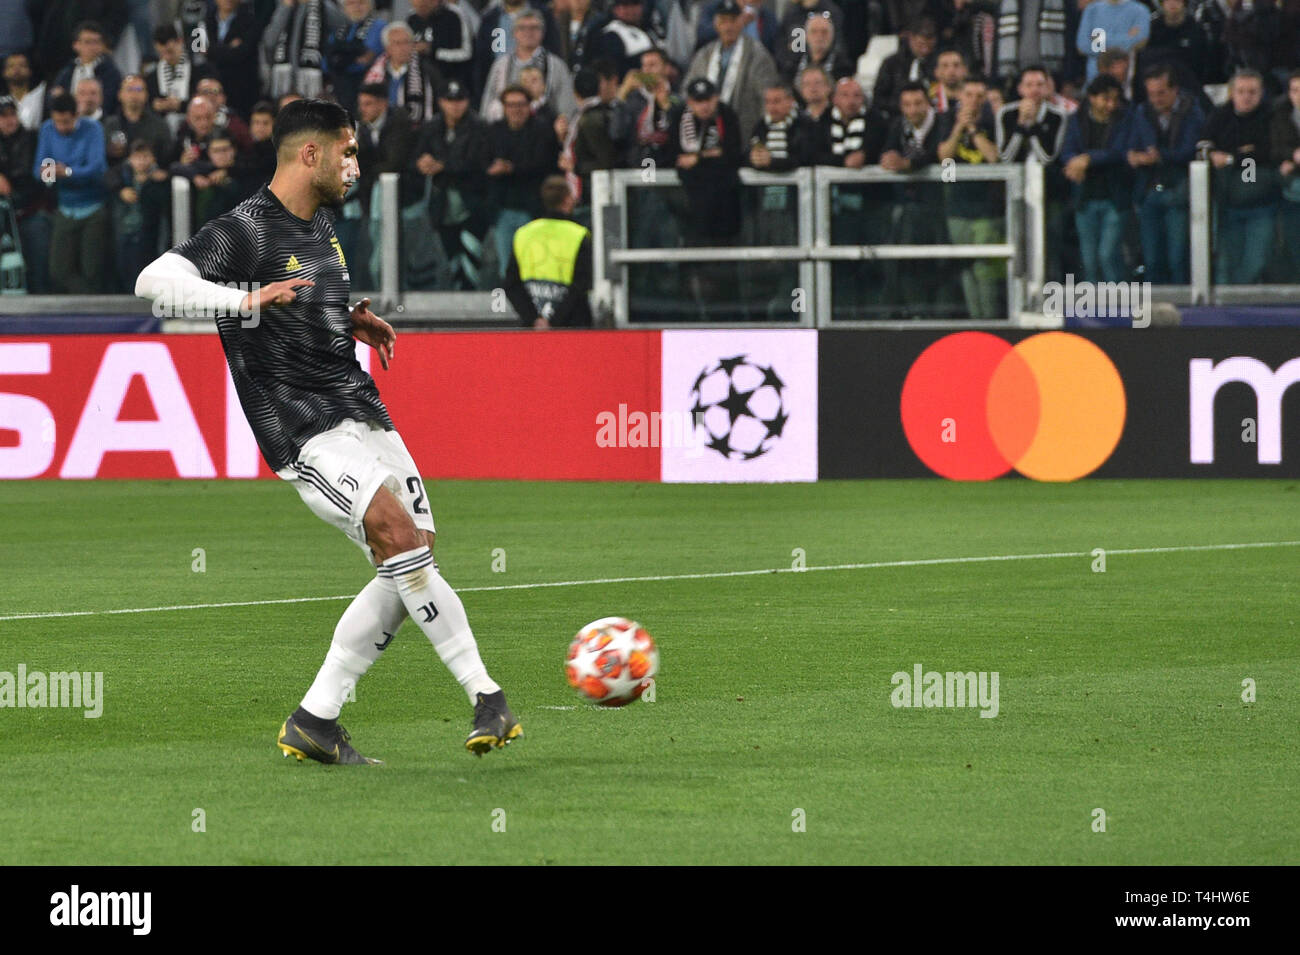 Turin, Italy. 16th Apr, 2019. Soccer: Champions League, knockout round, quarter-finals, second leg, Juventus Turin - Ajax Amsterdam. Emre Can of Juventus warming up. Credit: Antonio Polia/dpa/Alamy Live News Stock Photo